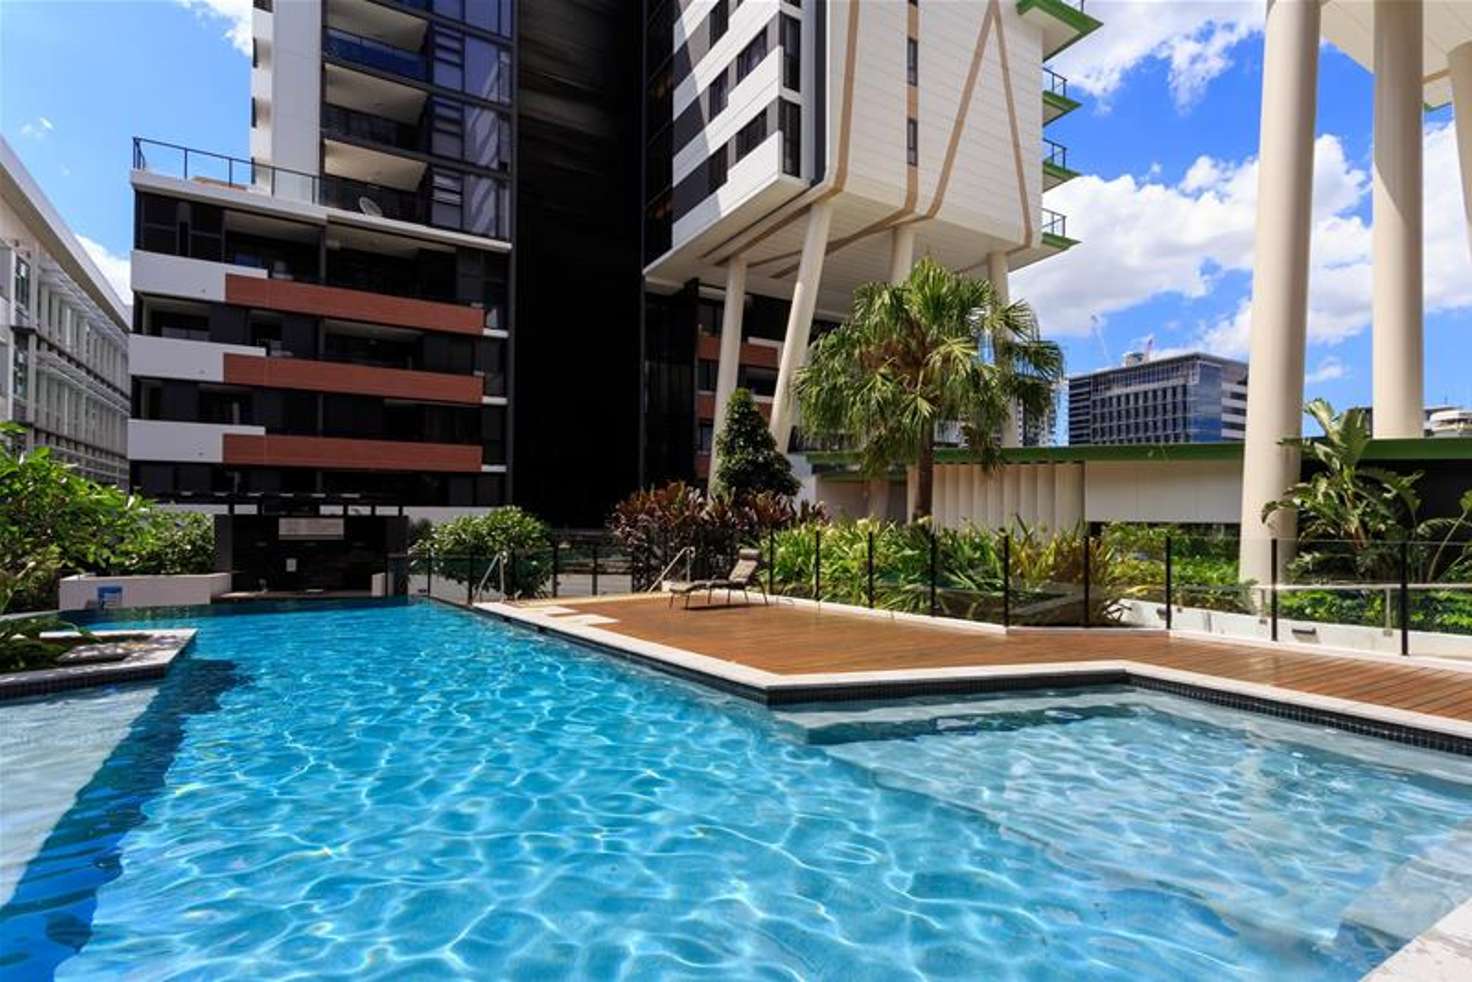 Main view of Homely apartment listing, 2018/9 Edmondstone Street, South Brisbane QLD 4101